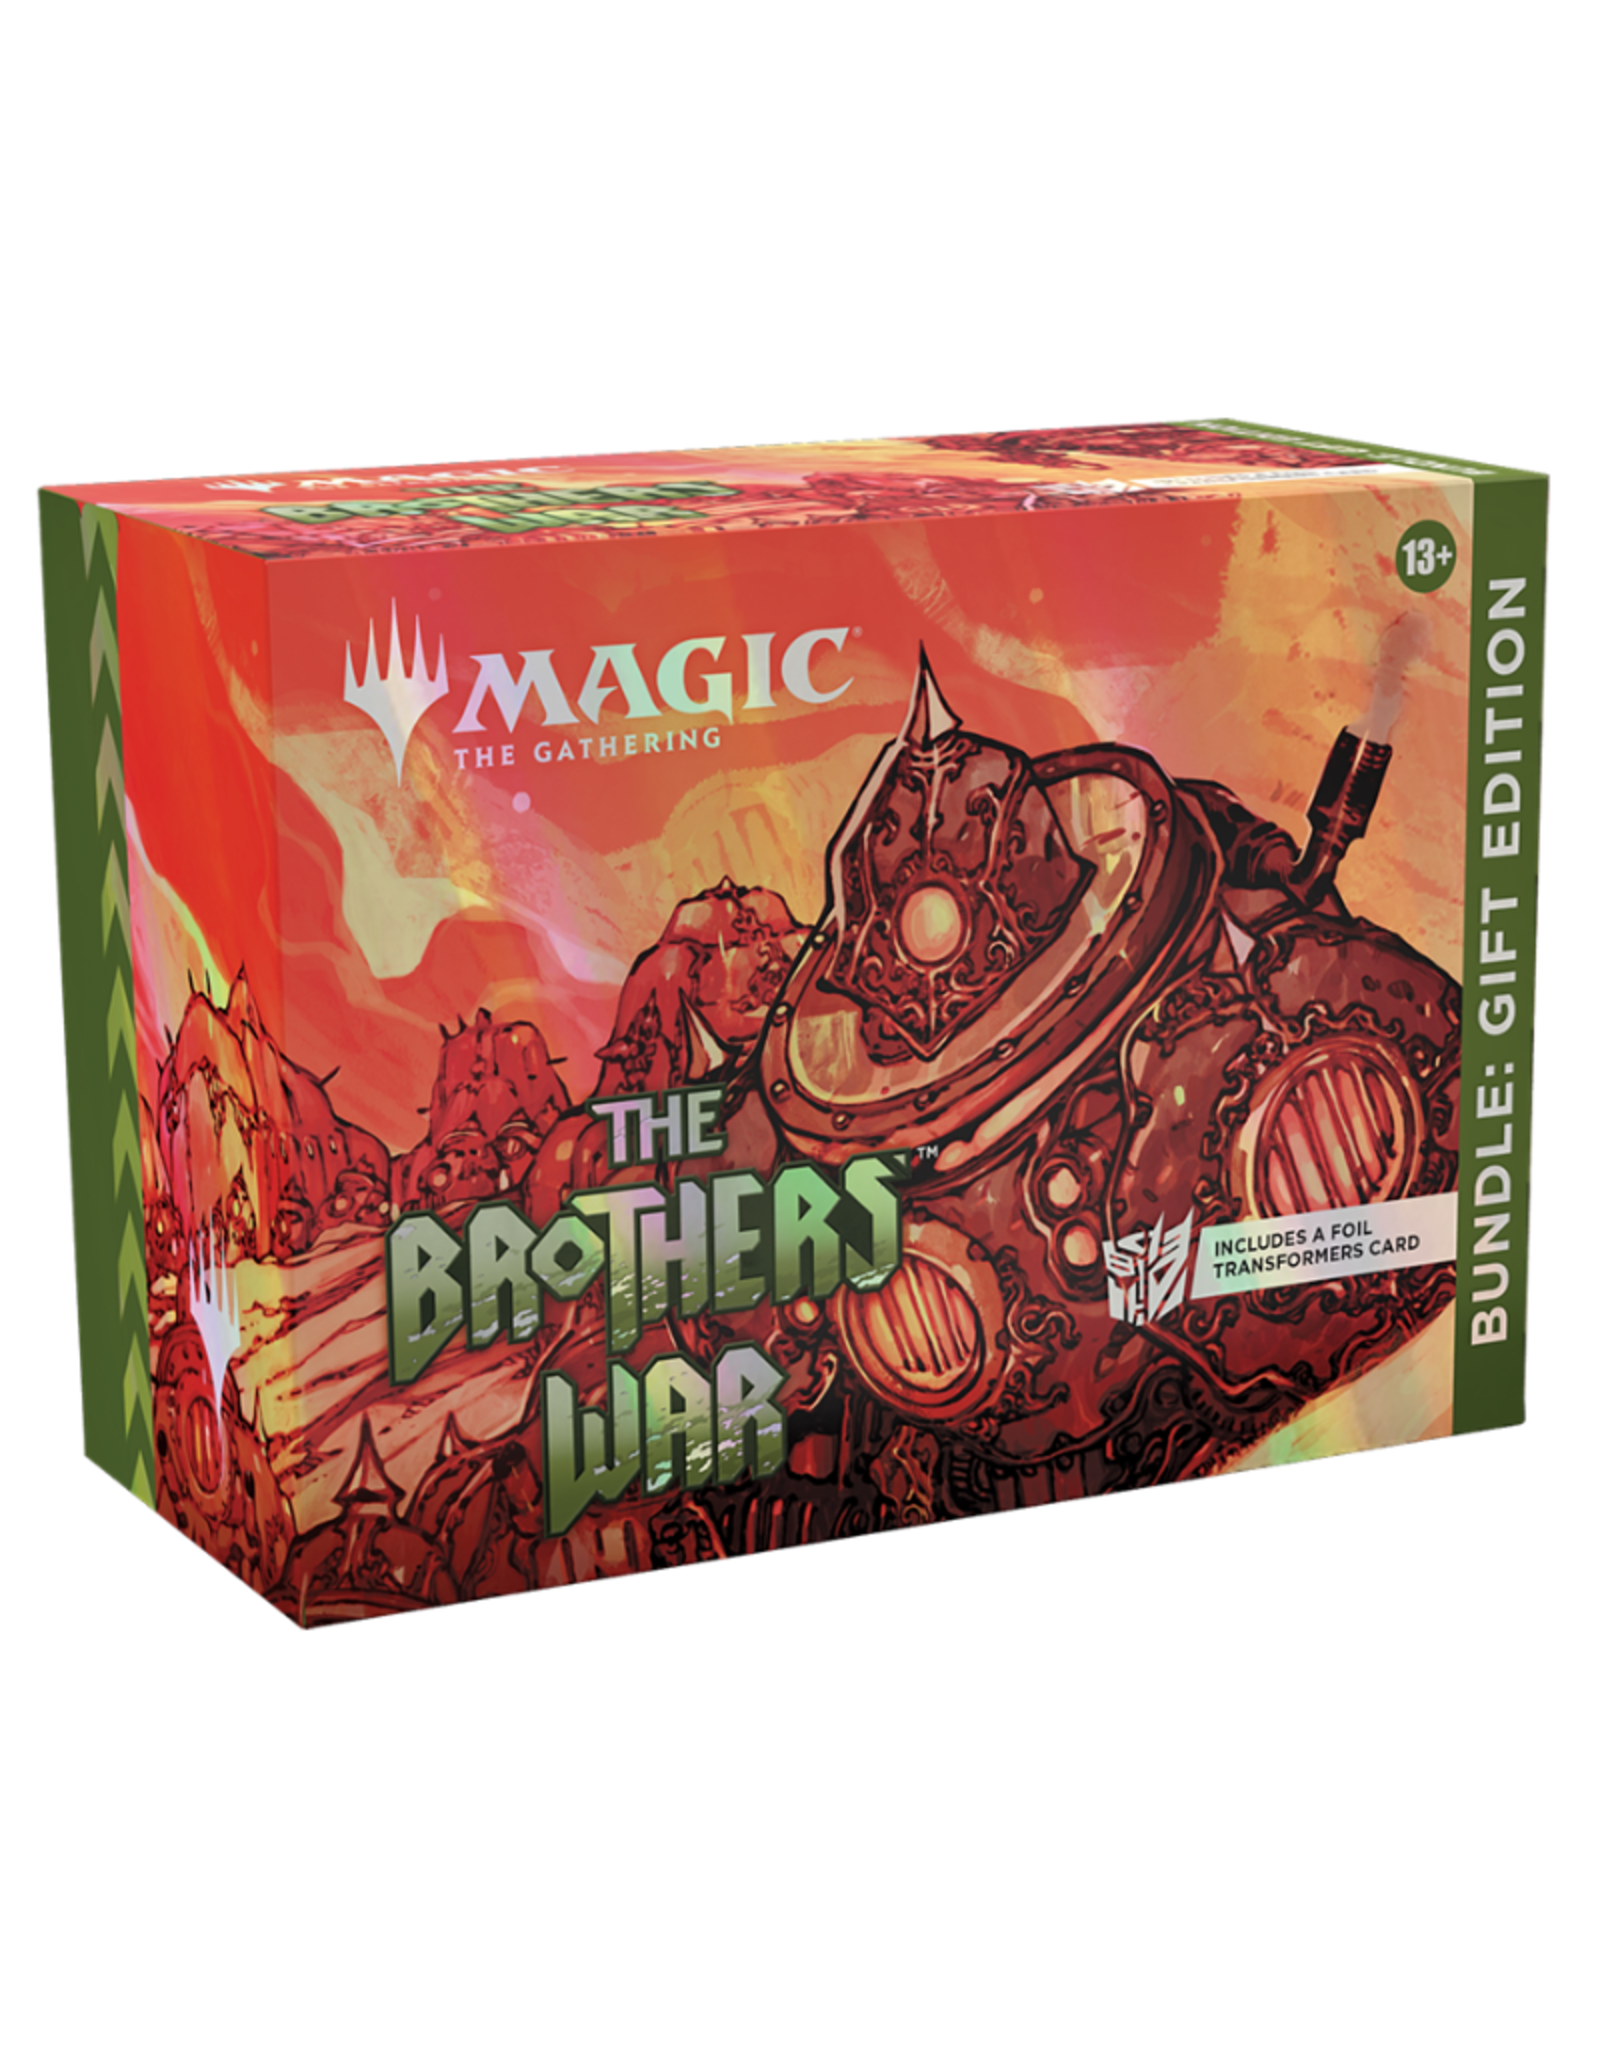 Card Game Holiday Gift Guide - Magic The Gathering, Lorcana, Pokemon and  More